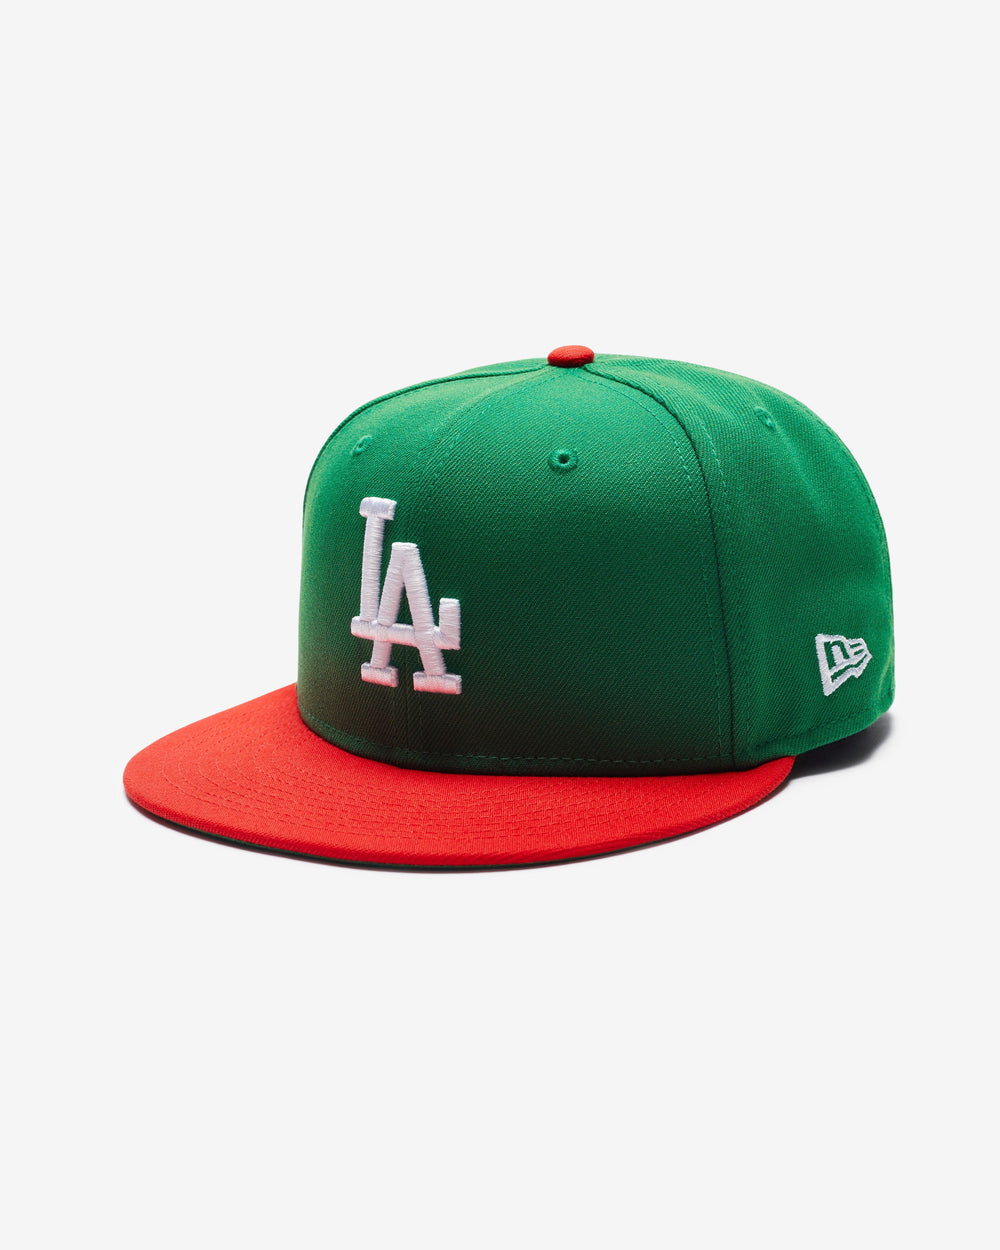 UNDEFEATED X NEW ERA DODGERS FITTED - KELLY GREEN - - / 6 7/8